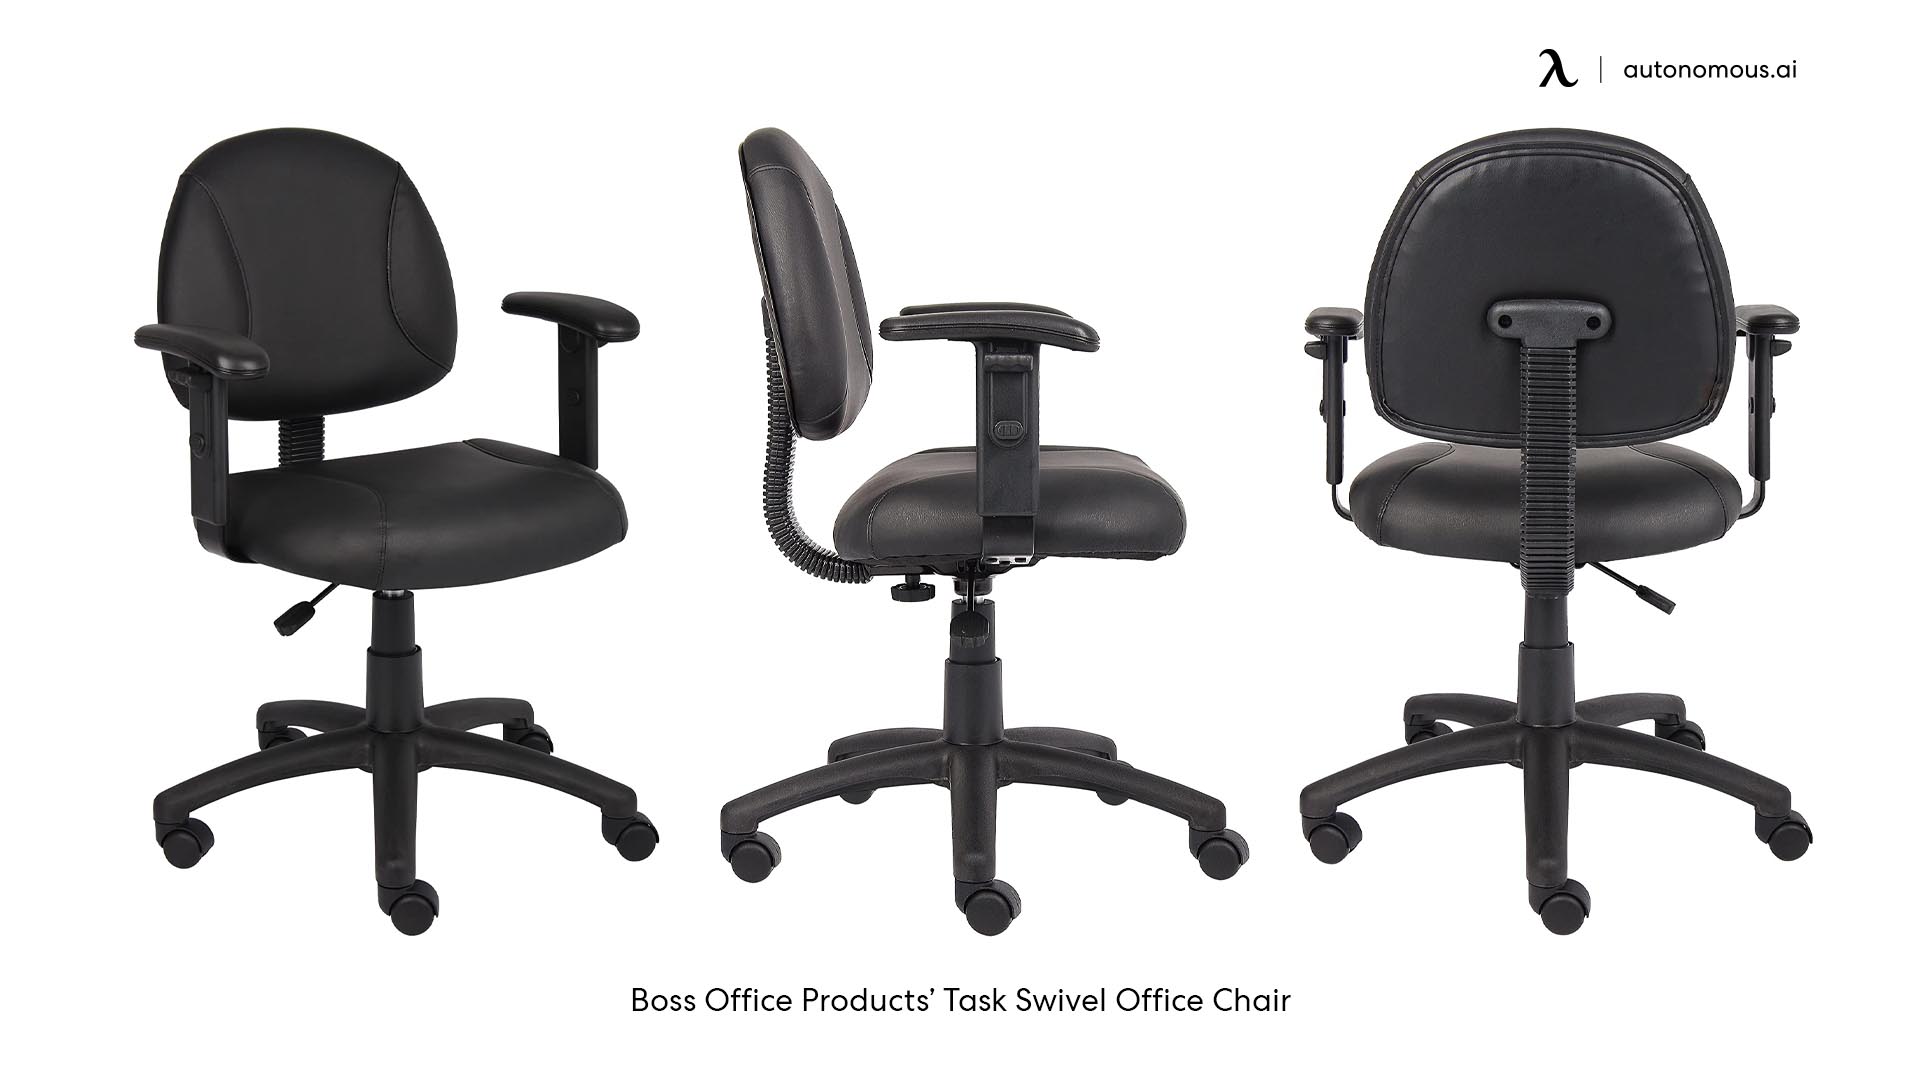 Boss Office Products’ Task Swivel Office Chair